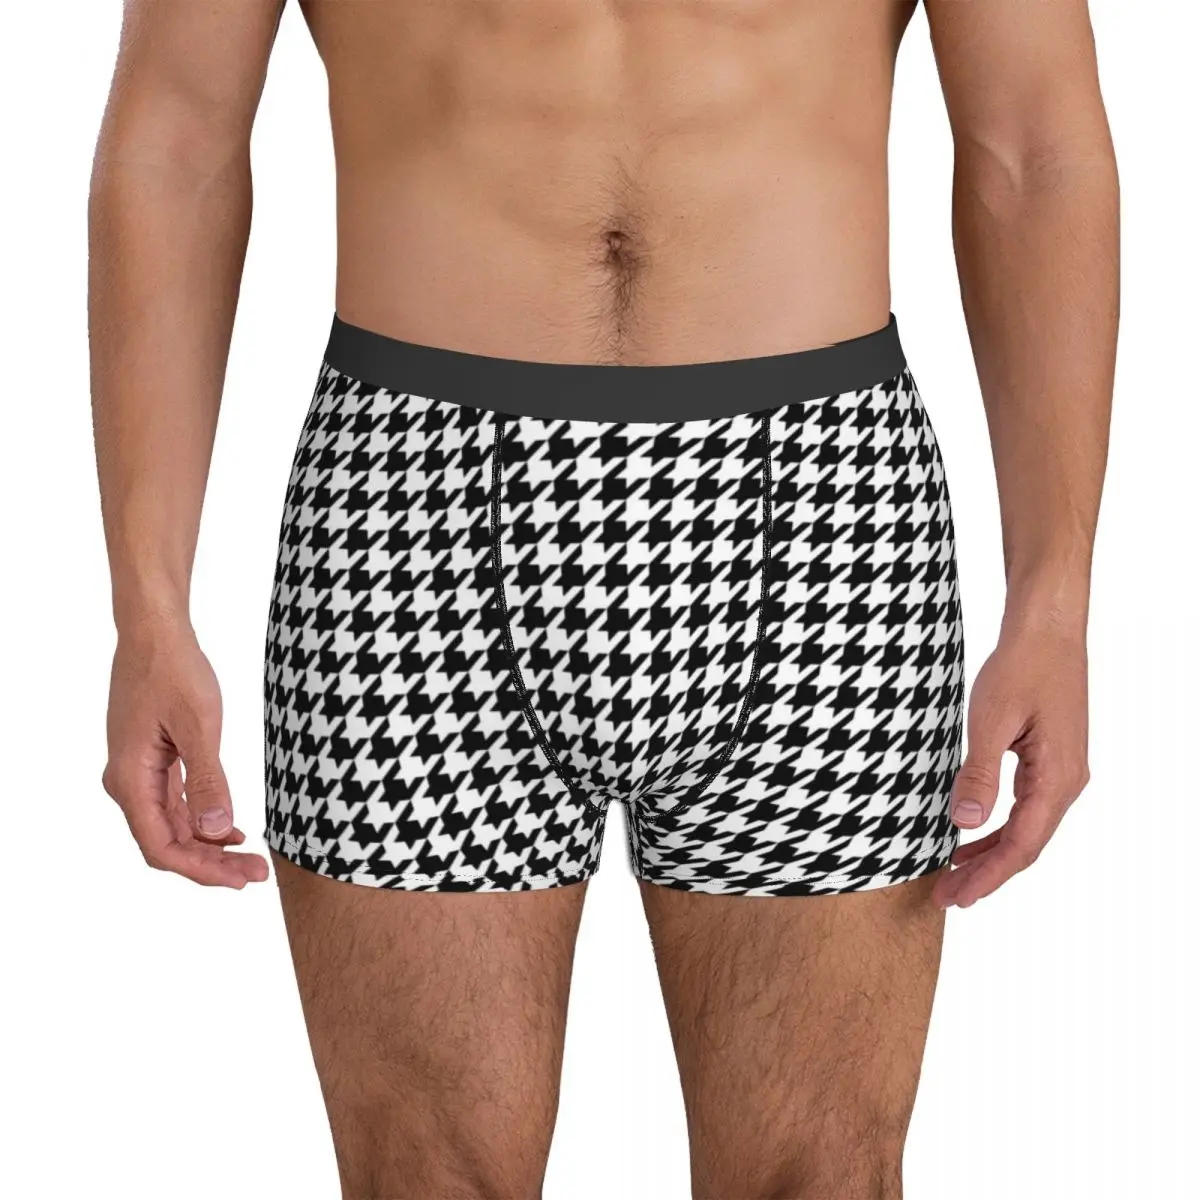 Black And White Houndstooth Underwear Classic Pattern Men Underpants Classic Boxershorts High Quality Shorts Briefs Plus Size